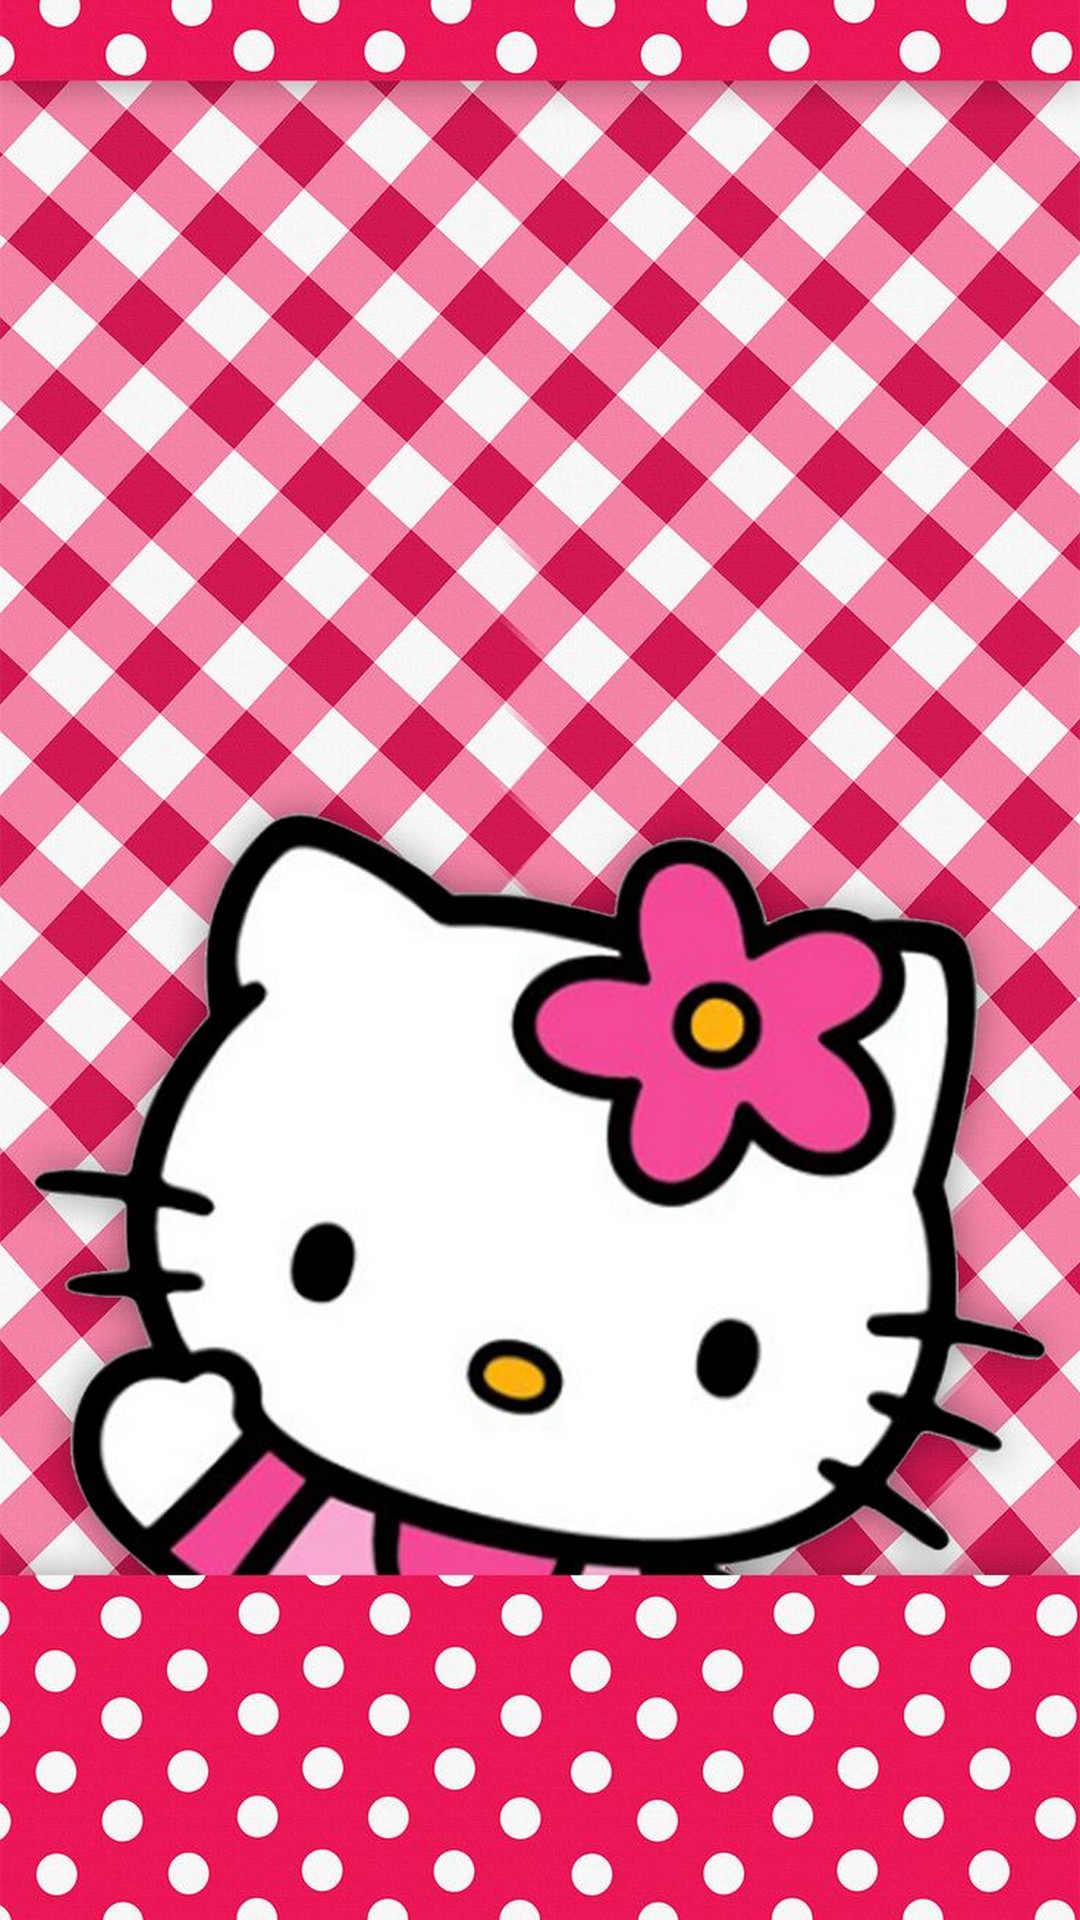 Hello Kitty iPhone Wallpaper with image resolution 1080x1920 pixel. You can make this wallpaper for your iPhone 5, 6, 7, 8, X backgrounds, Mobile Screensaver, or iPad Lock Screen